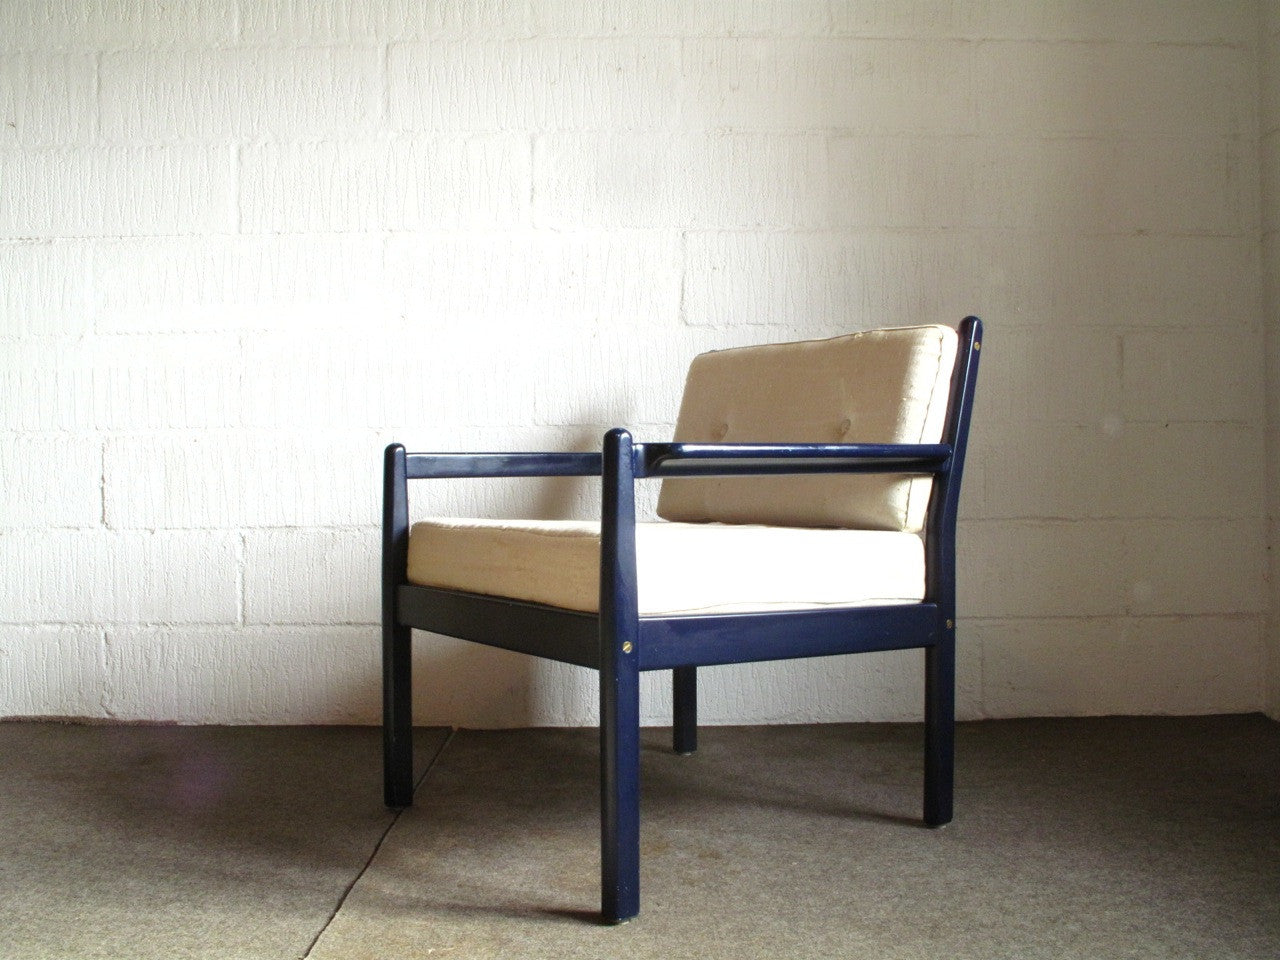 Armchairs designed by Karin Mobring for Ikea